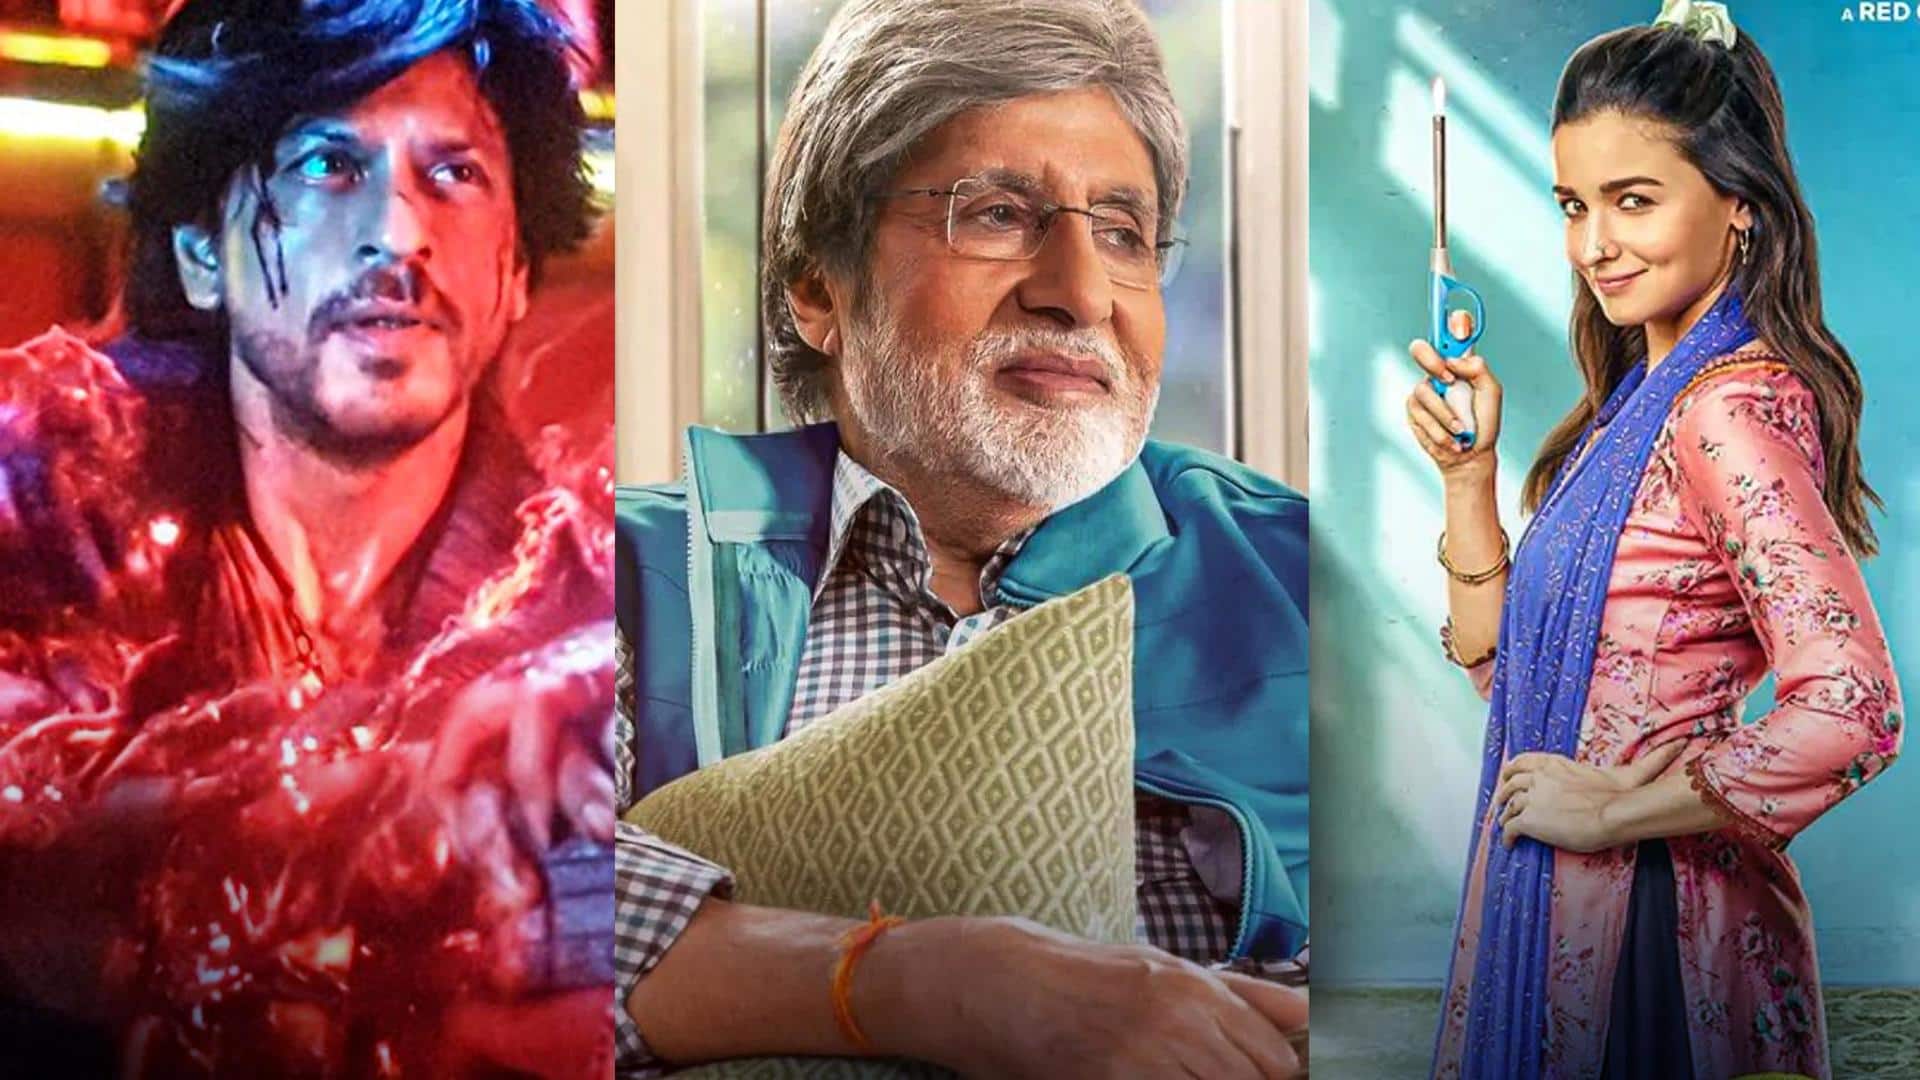 Year wrap: Listing 6 scintillating scenes from 2022 films